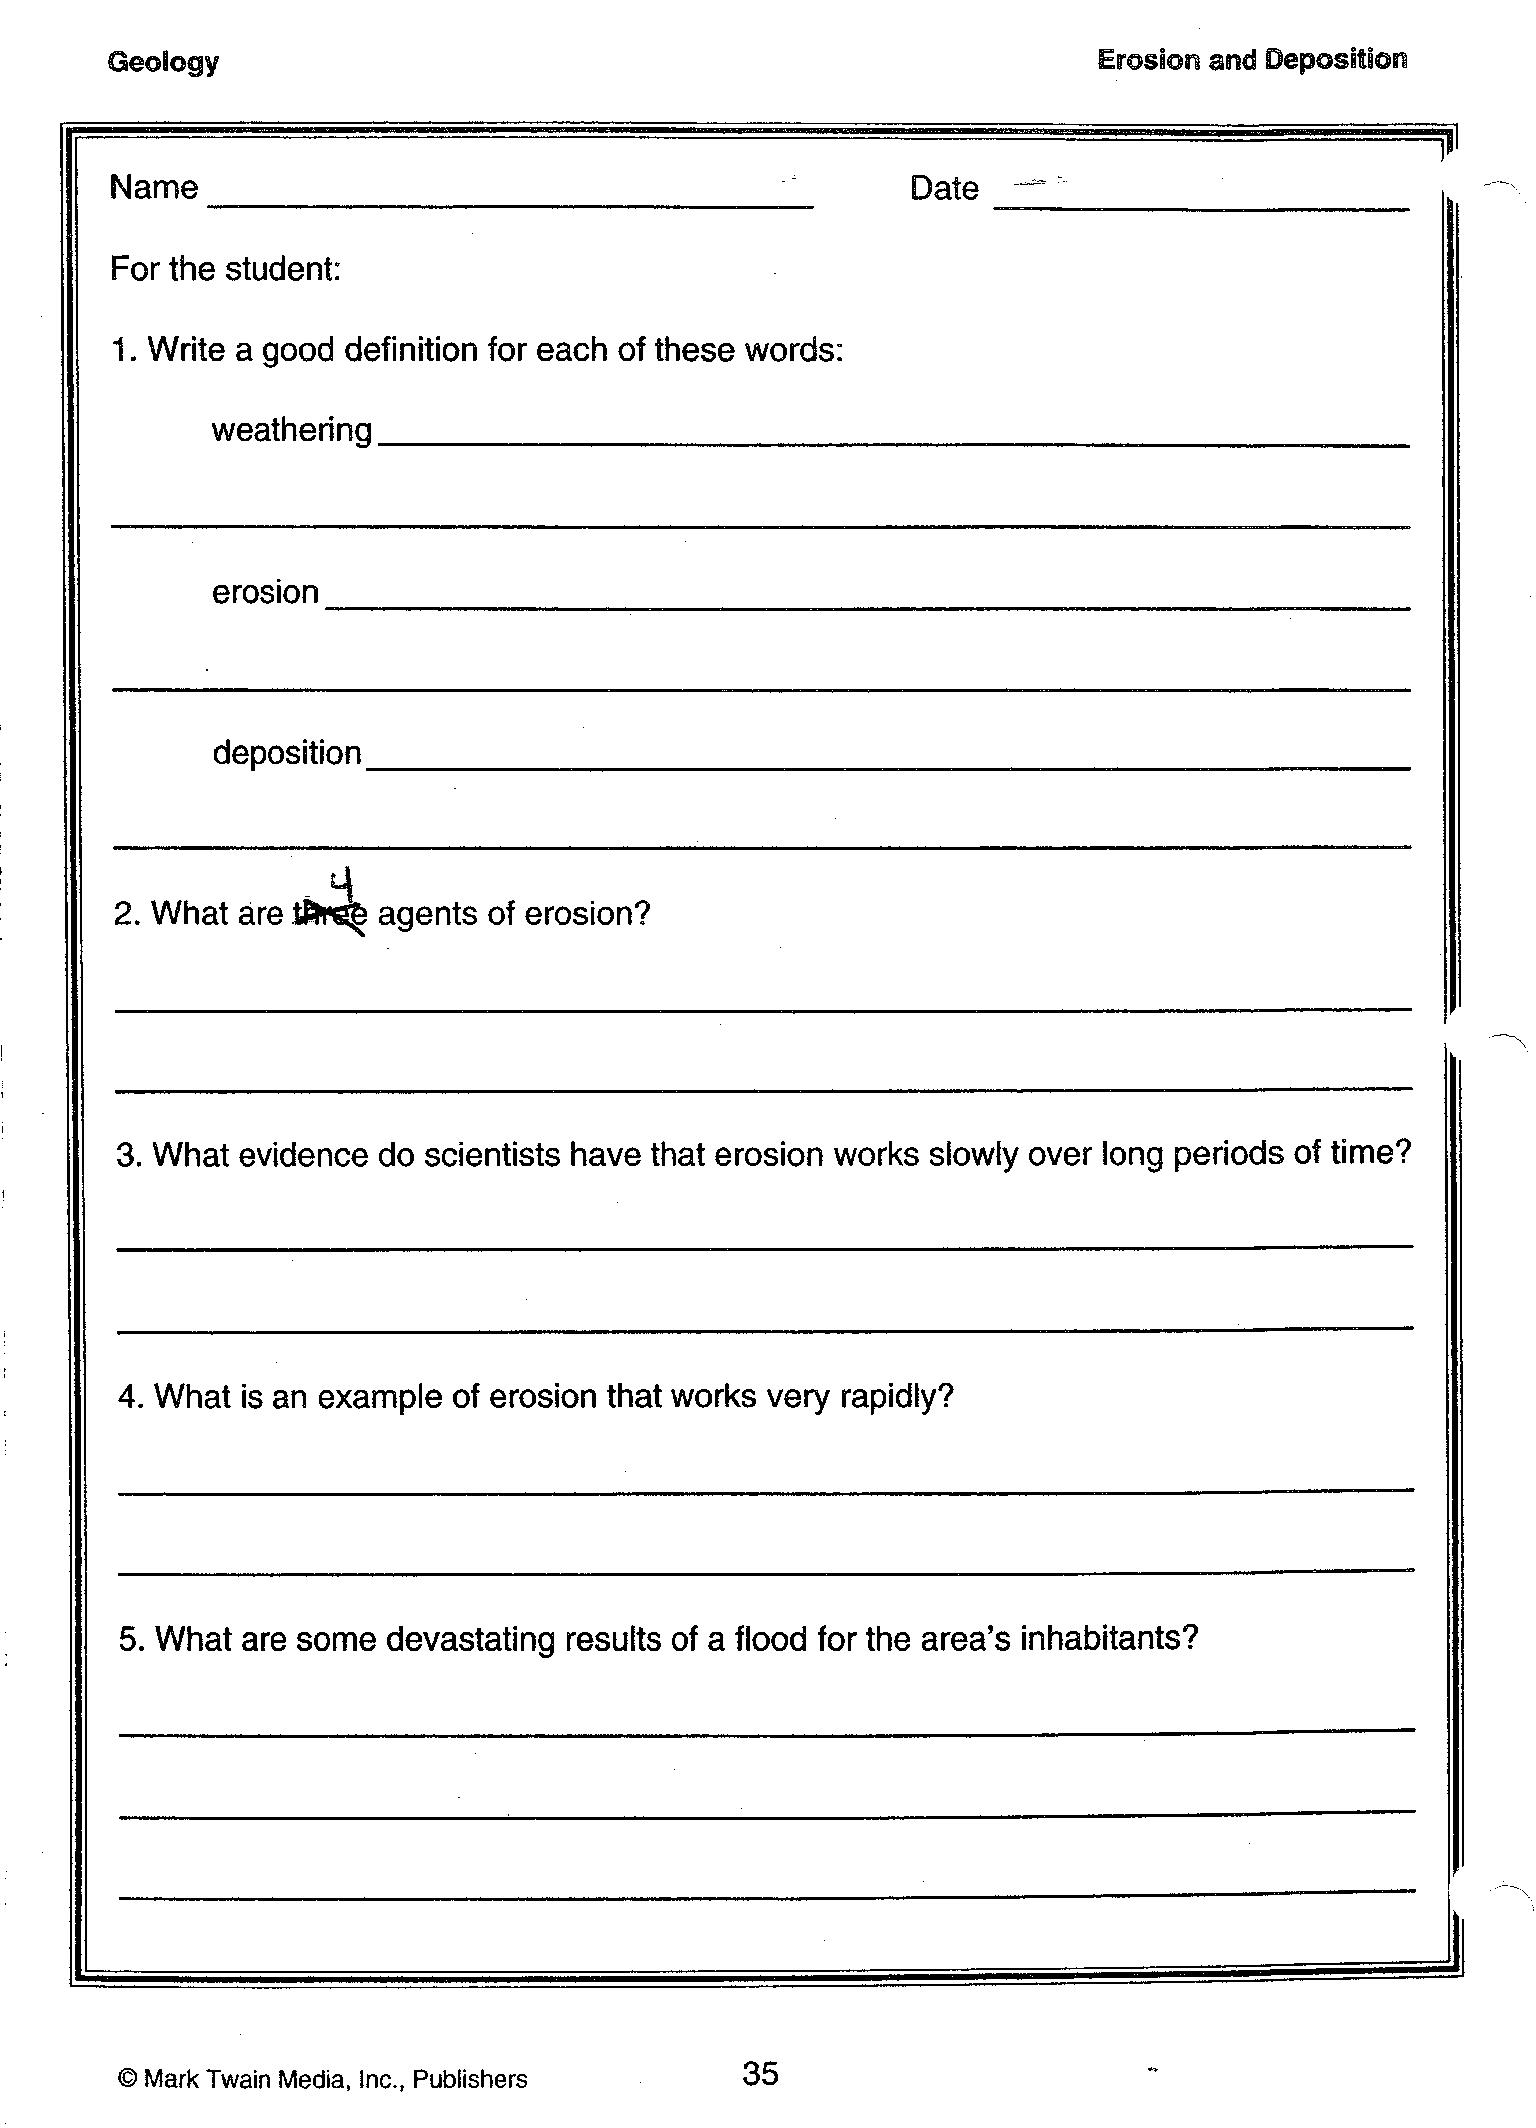 Weathering And Erosion Worksheets